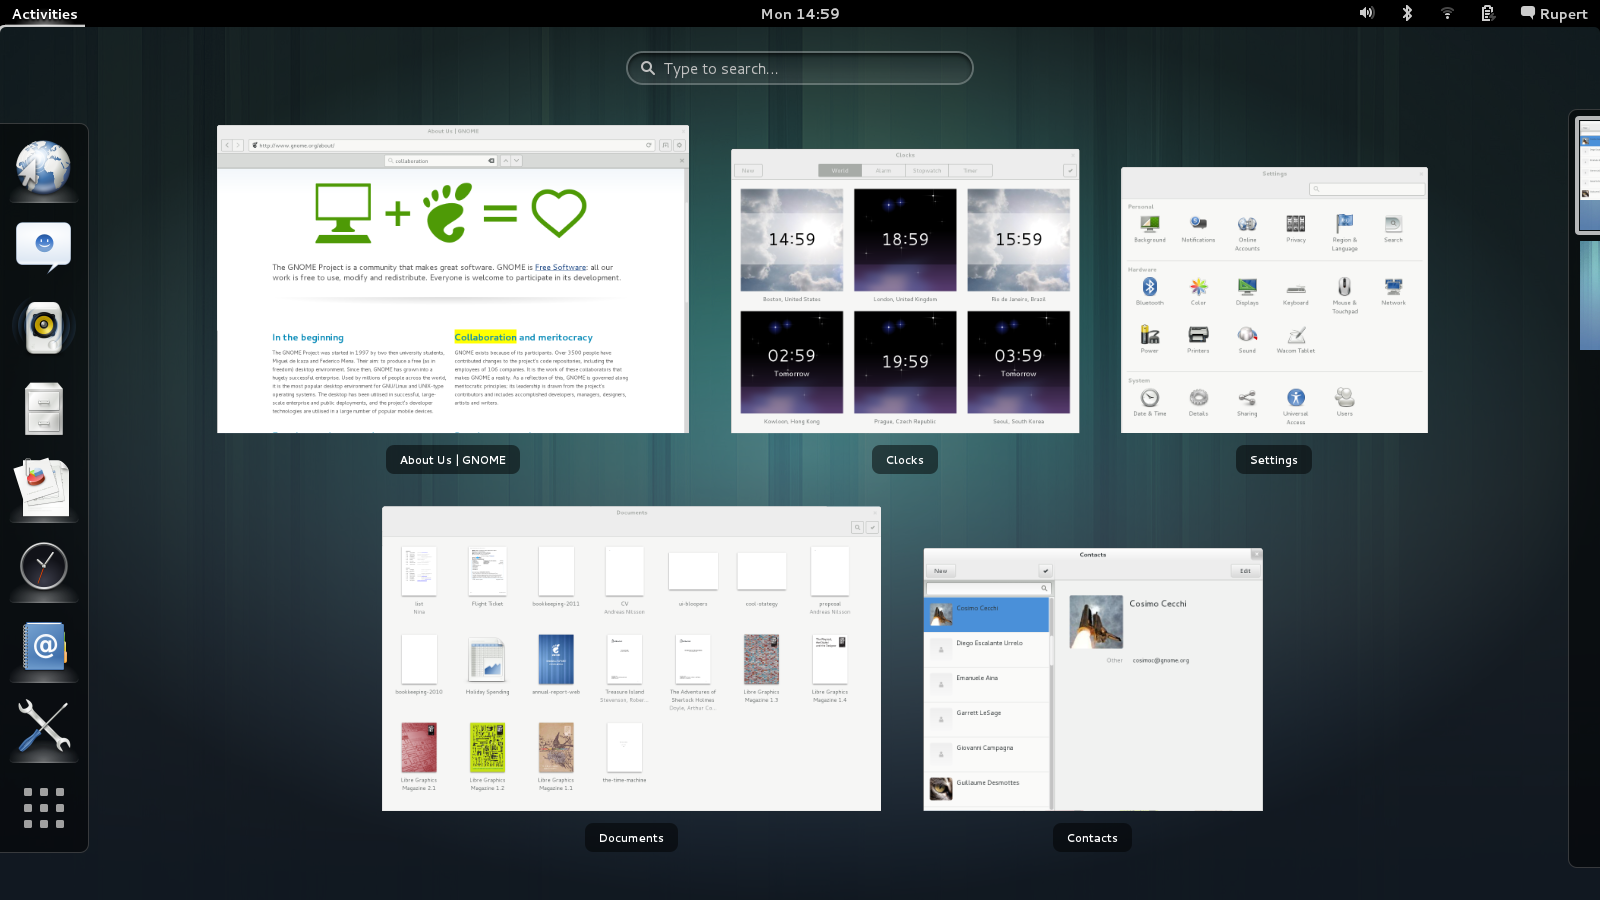 http://www.gnome.org/wp-content/uploads/2013/03/window-selection-3-8.png